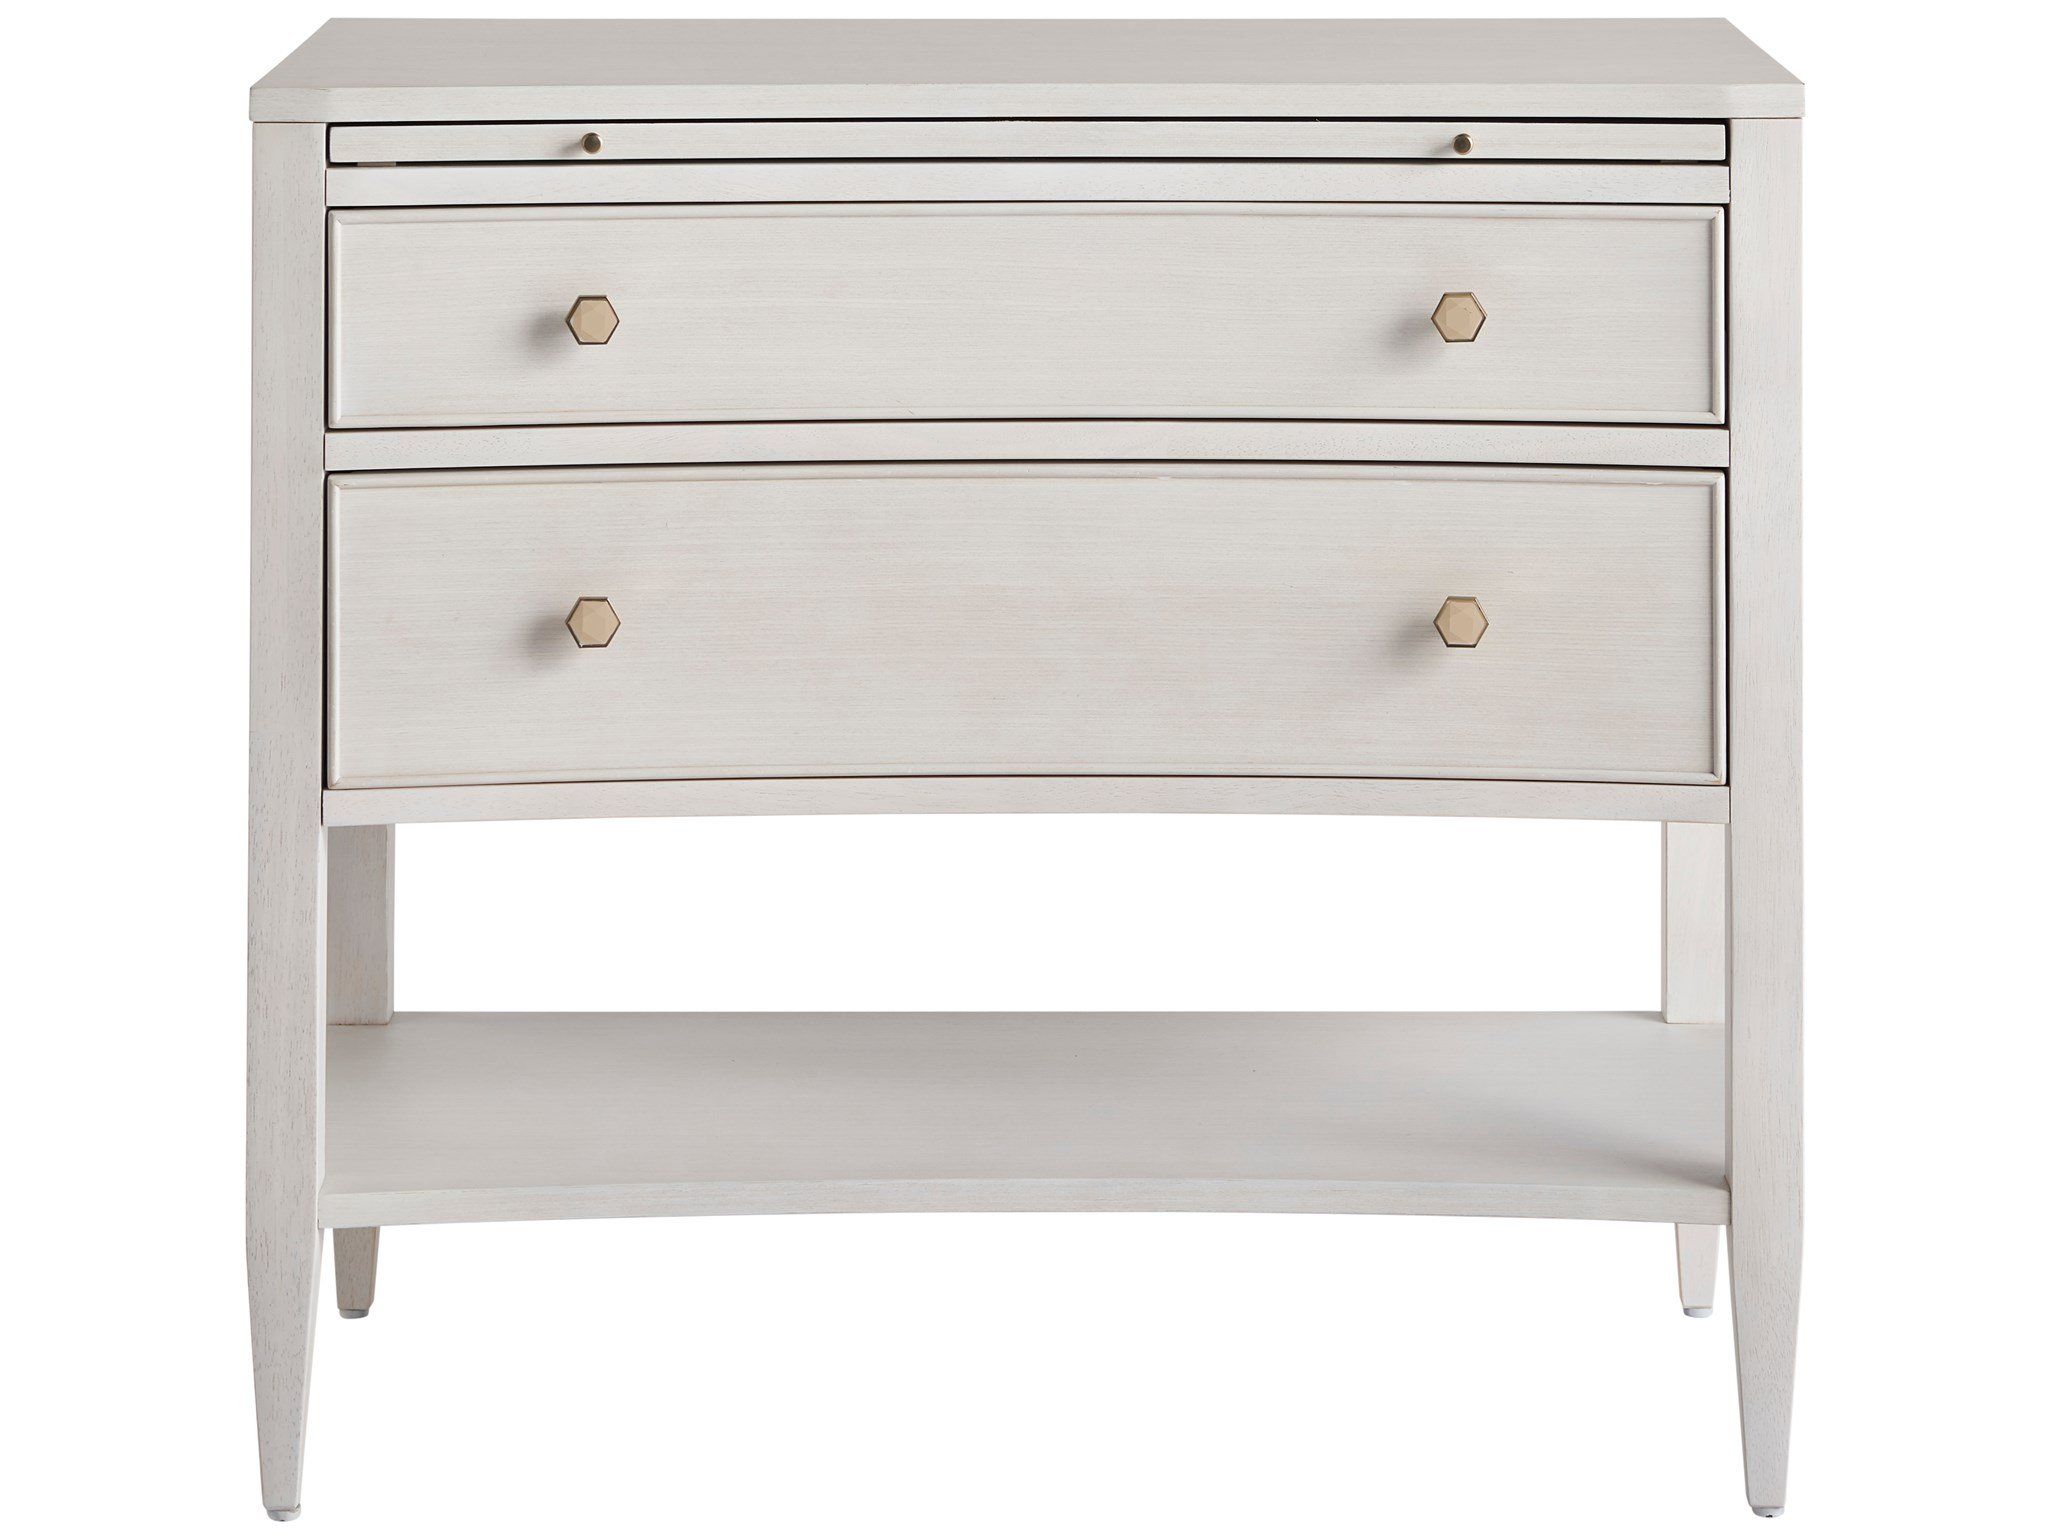 Miranda Kerr Home Chelsea Nightstand | Savvy Furniture With Regard To Rey Coastal Chic Universal Console 2 Drawer Tv Stands (View 6 of 15)